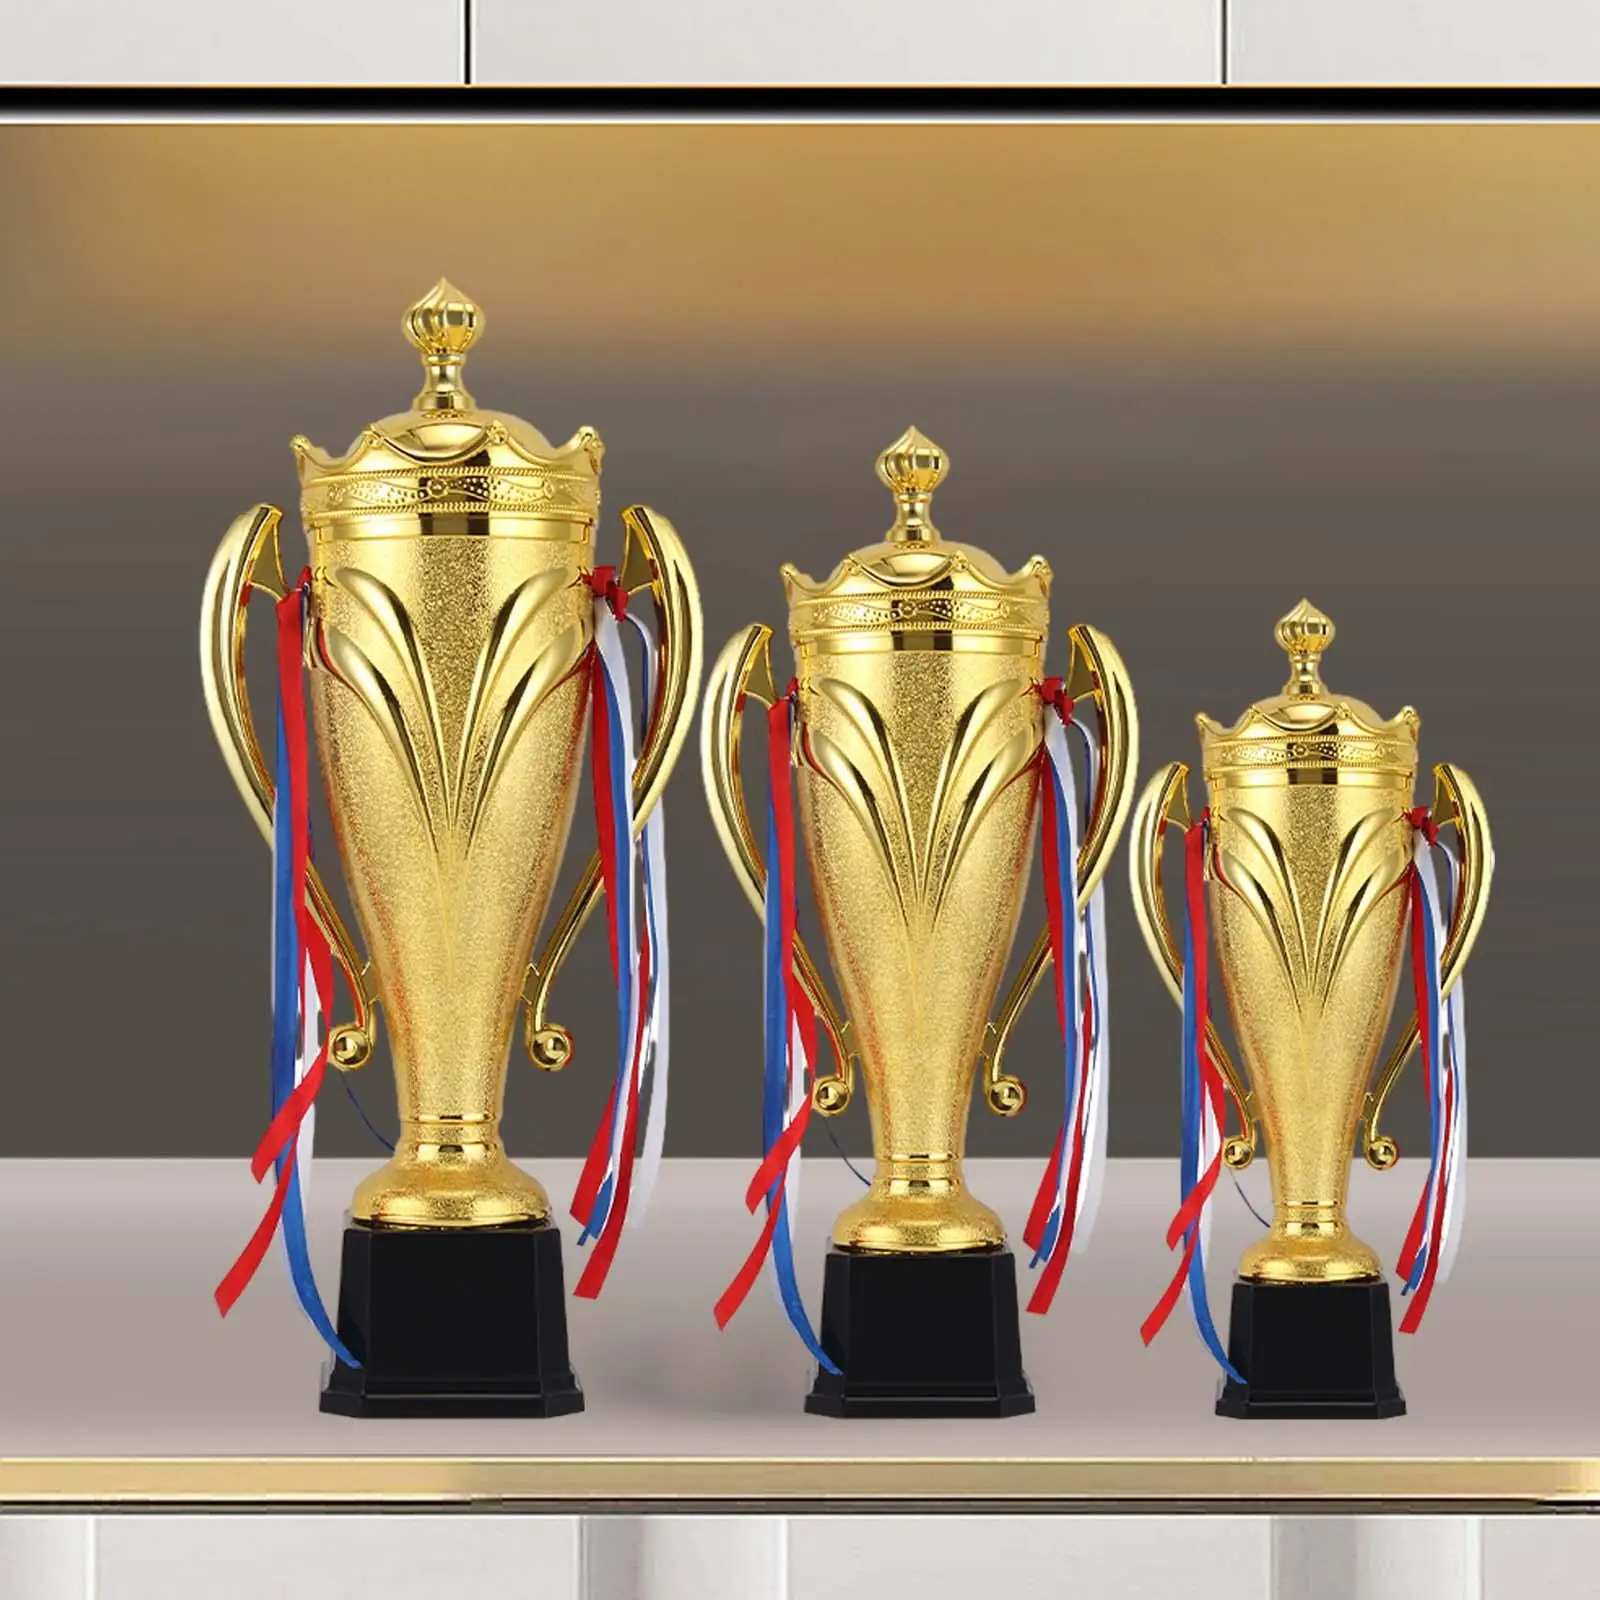 Child Trophy Cups PP Award Trophies Cup Rewards Prizes Exquisite Workmanship Multipurpose Decorative for Displaying Birthdays